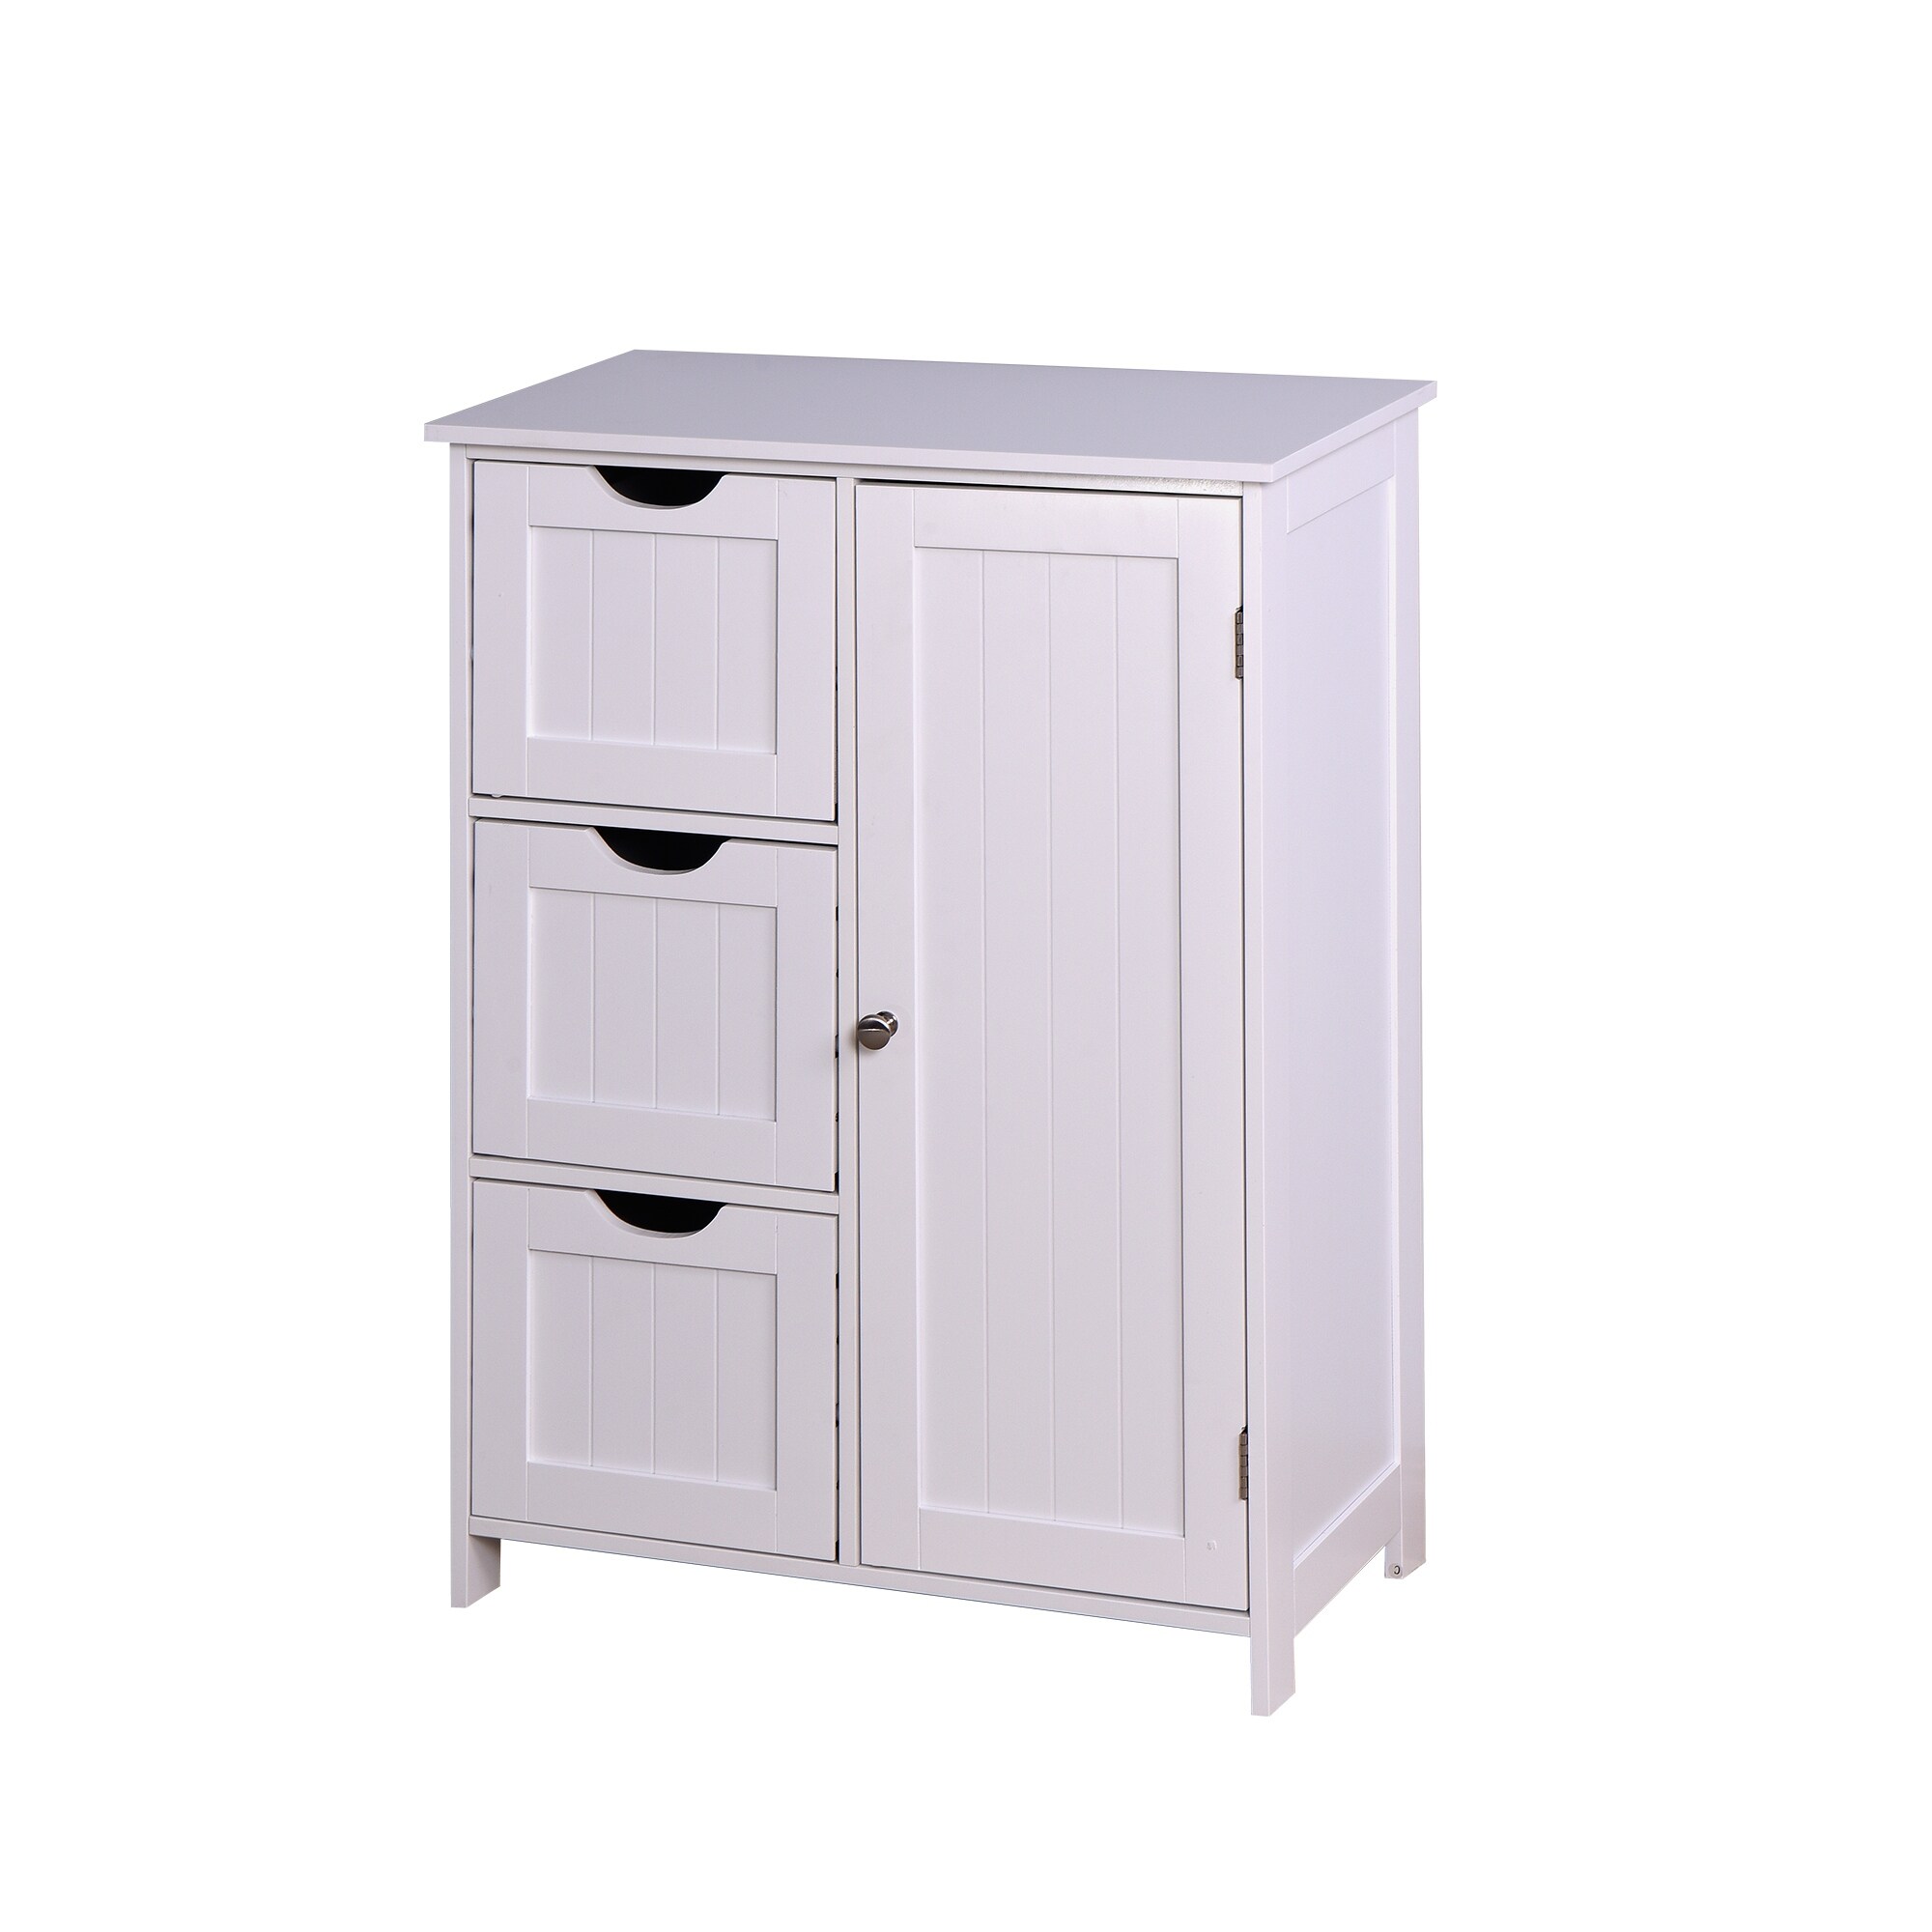 https://ak1.ostkcdn.com/images/products/is/images/direct/886e923484fc3096bf3fd4995265d09460307cca/Bathroom-Storage-Cabinet%2C-White-Floor-Cabinet-with-3-Large-Drawers-and-1-Adjustable-Shelf.jpg